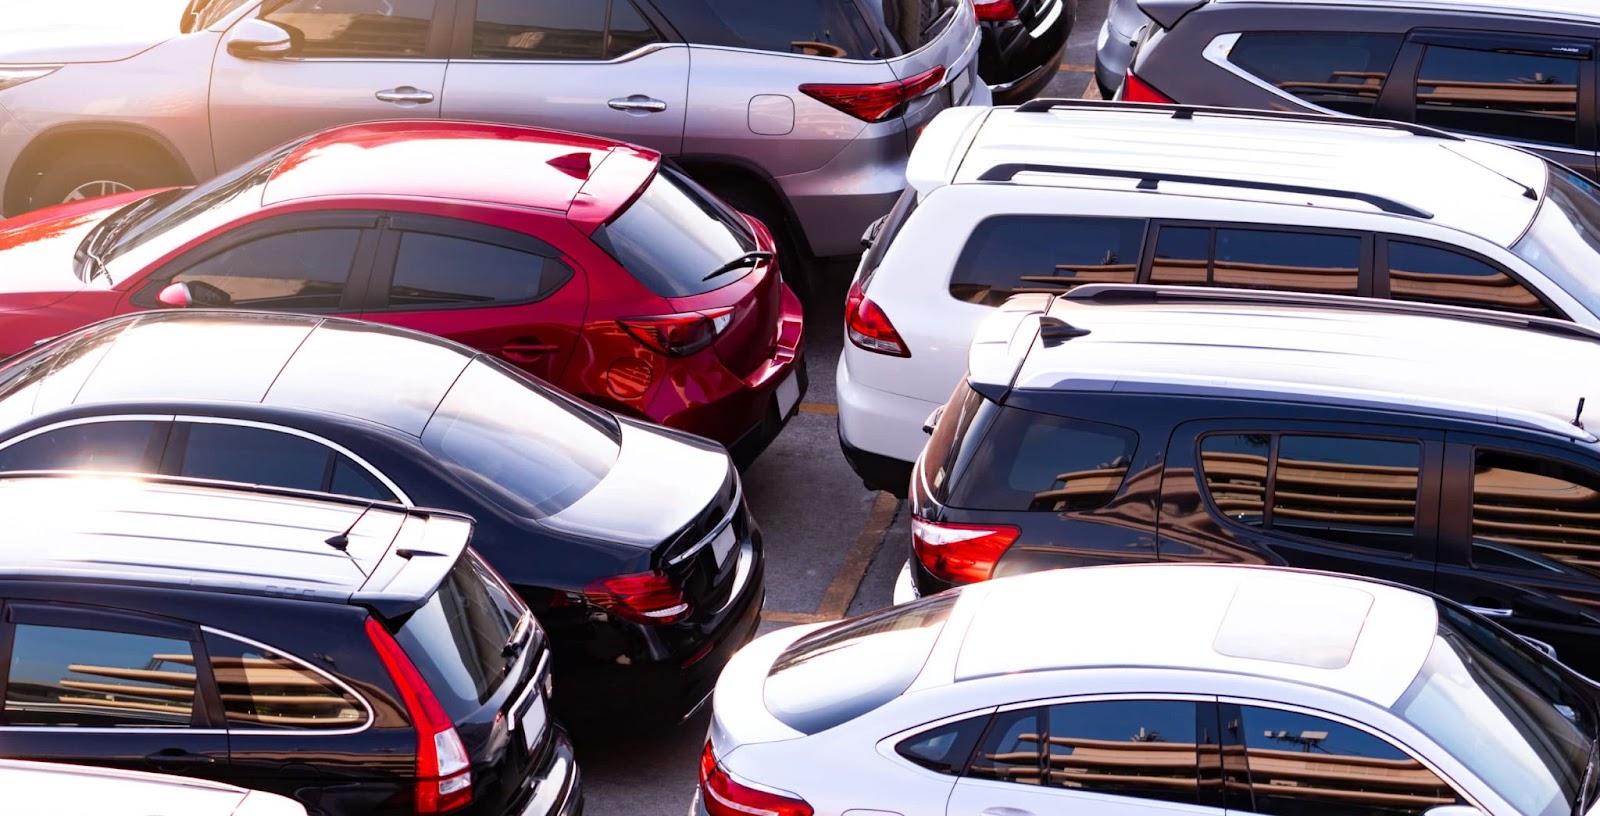 Rows of new cars parked at a dealership lot. Optimizing dealership inventory turnover can help ensure a fresh selection of vehicles to meet customer demand.